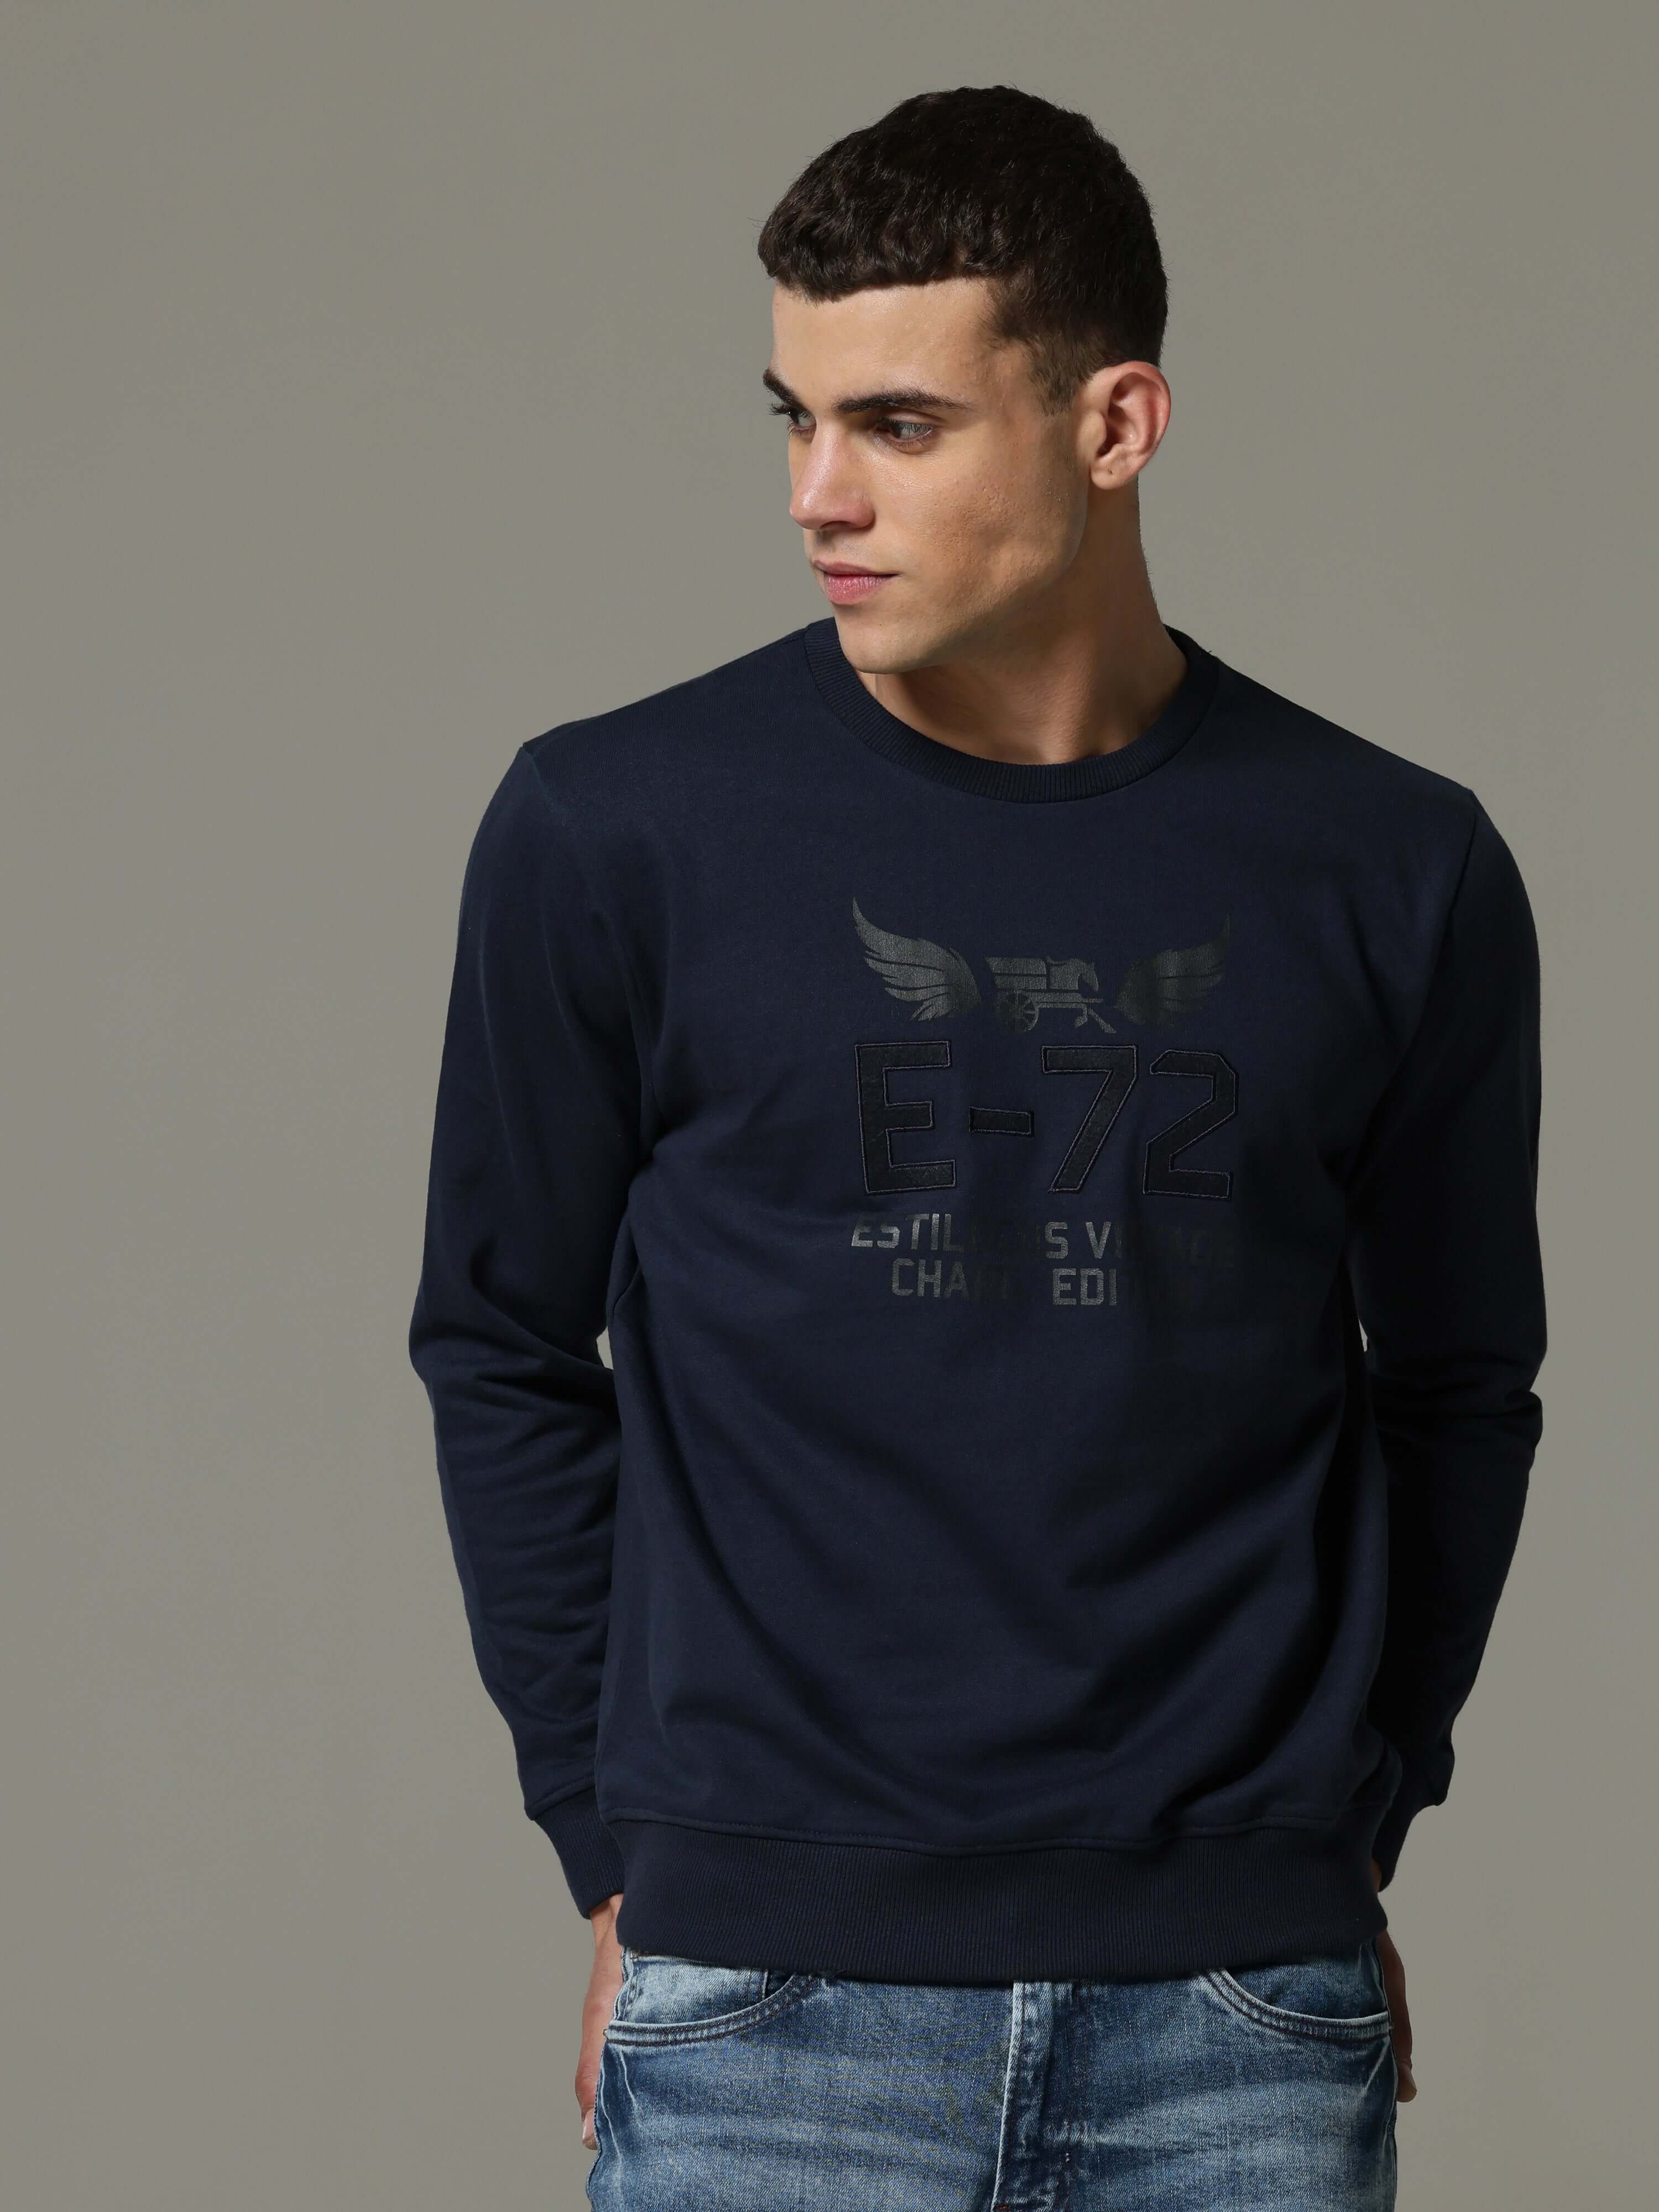 Vintage Edition Navy Blue Sweat Shirt shop online at Estilocus. • Crew neck• Long sleeve• Ribbing around neckline, Cuff & hem• HD quality print and fine embroidery Fit : Comfort fit Size : The model is wearing M size Model height : 6 Feet Wash care : Cold